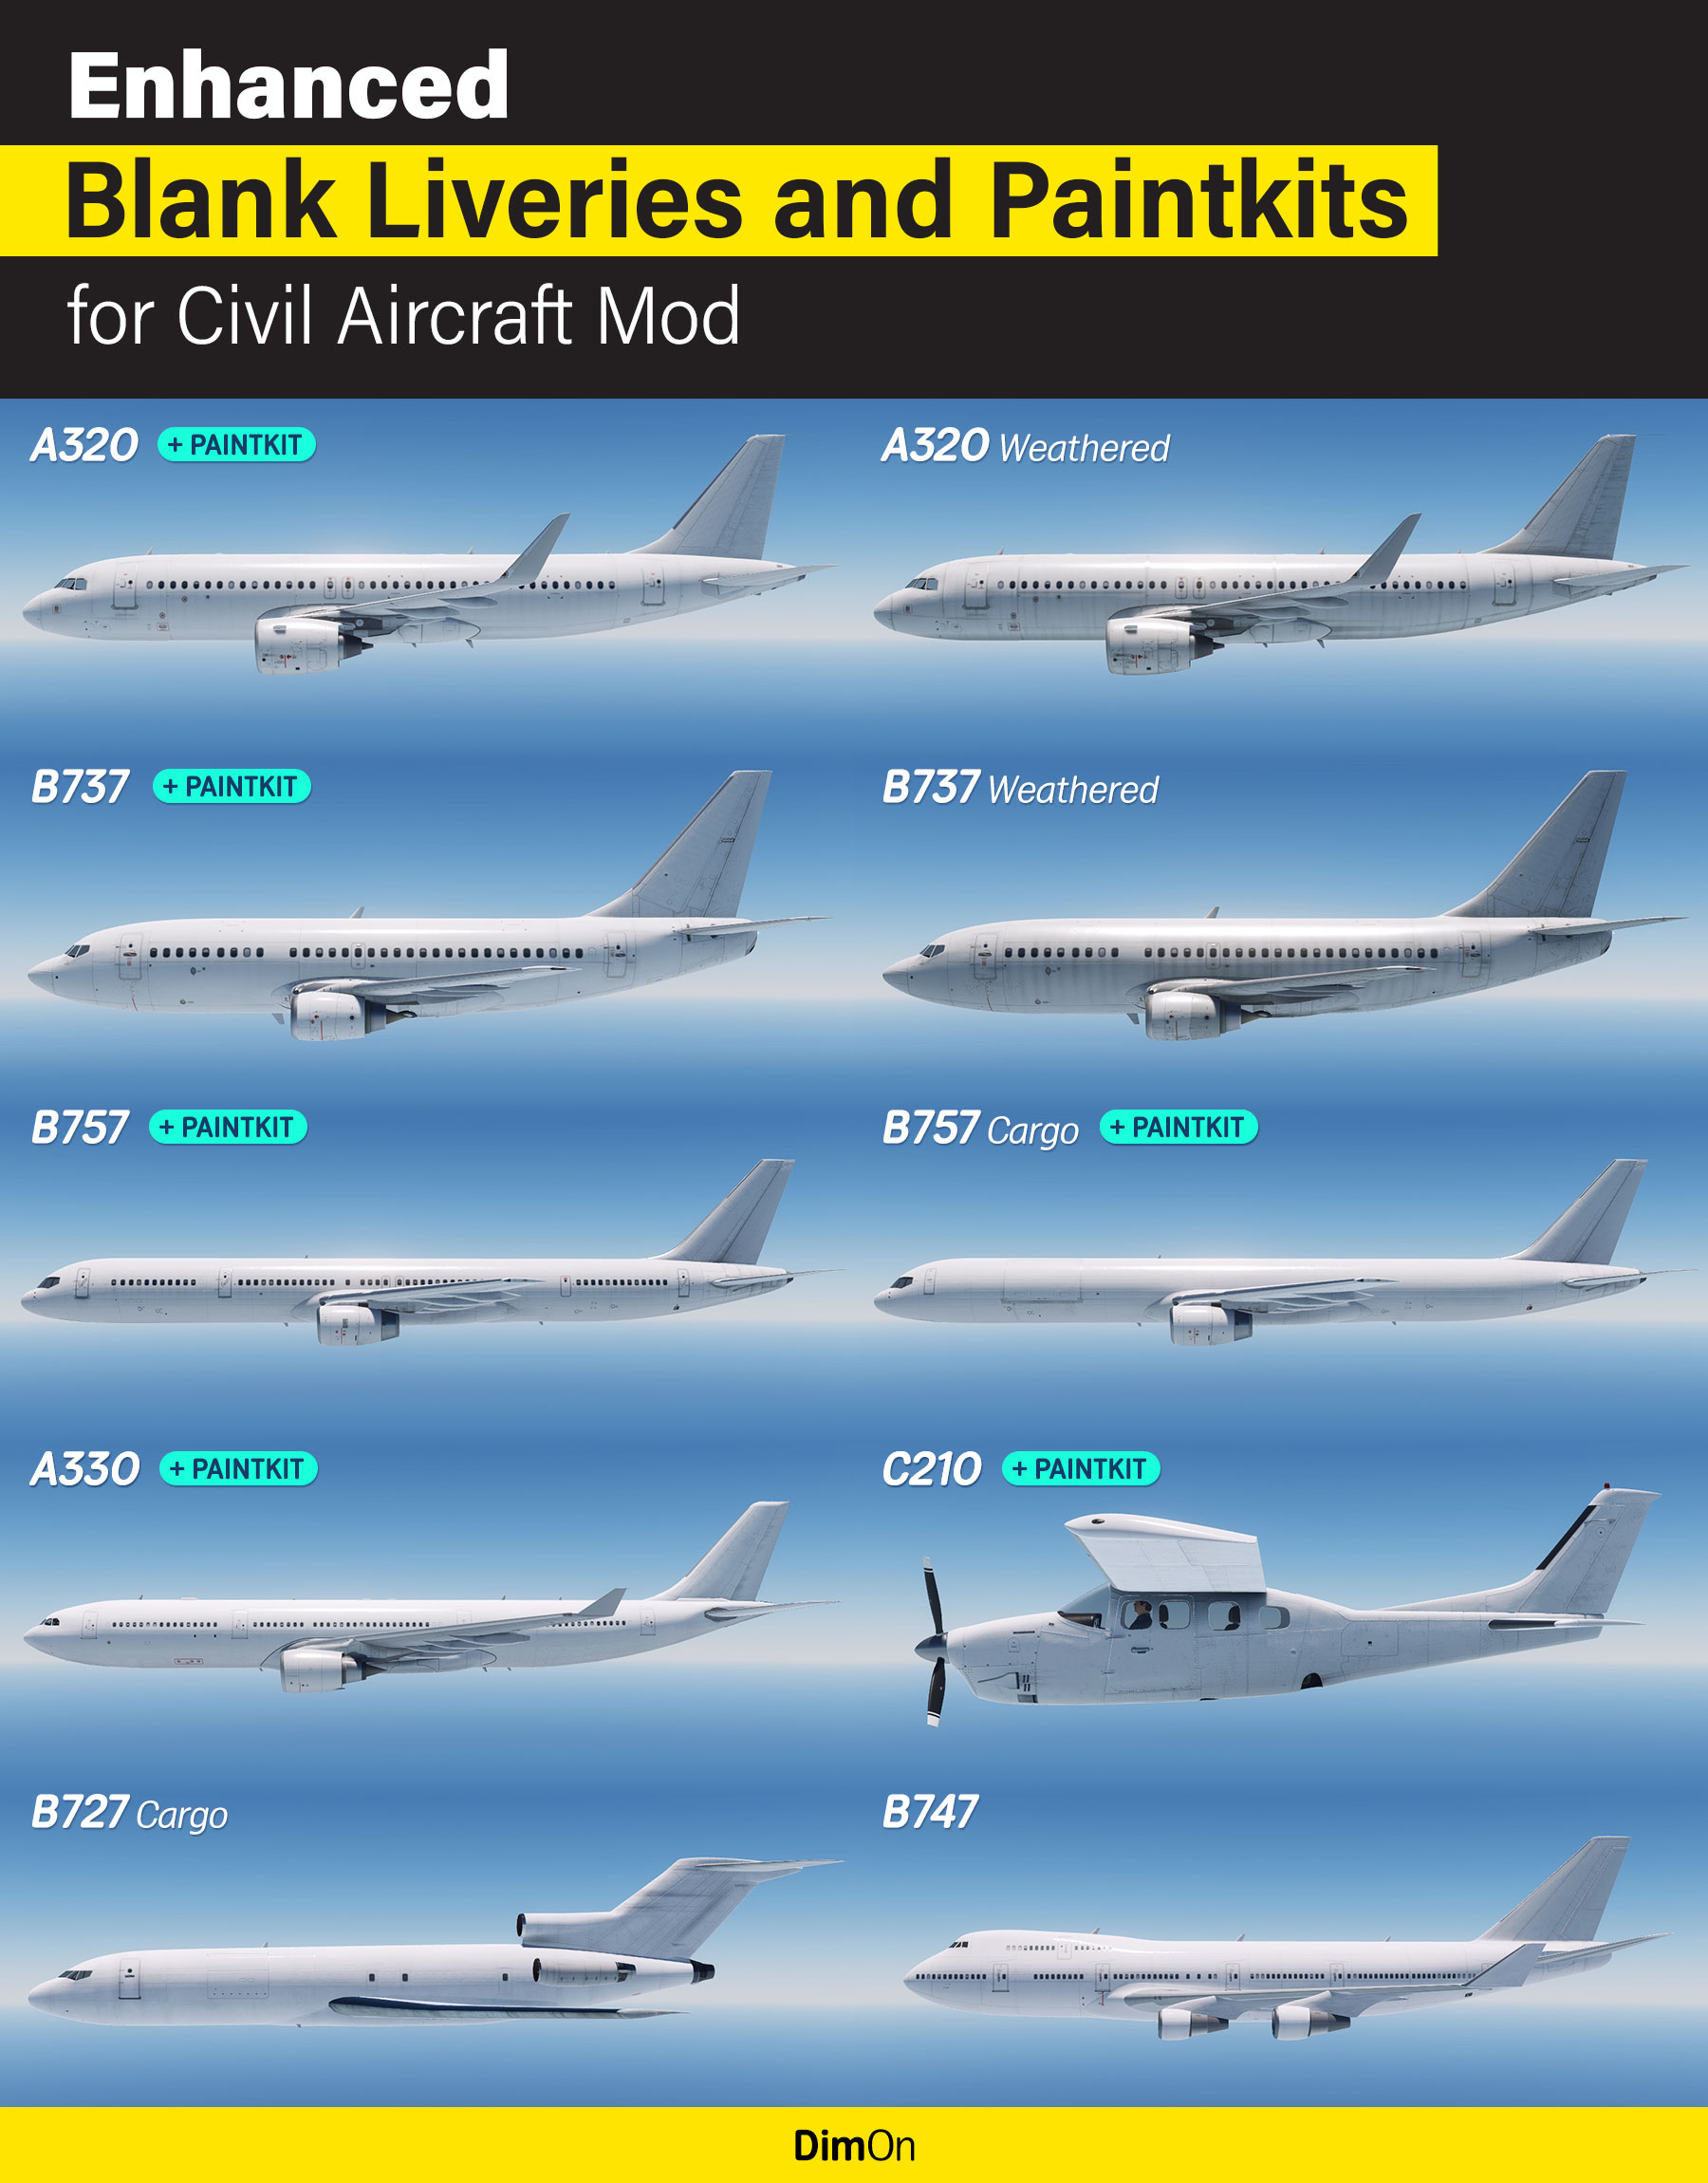 Enhanced Blank Liveries and Paintkits for Civil Aircraft Mod (CAM) - Updated 13 September 2021